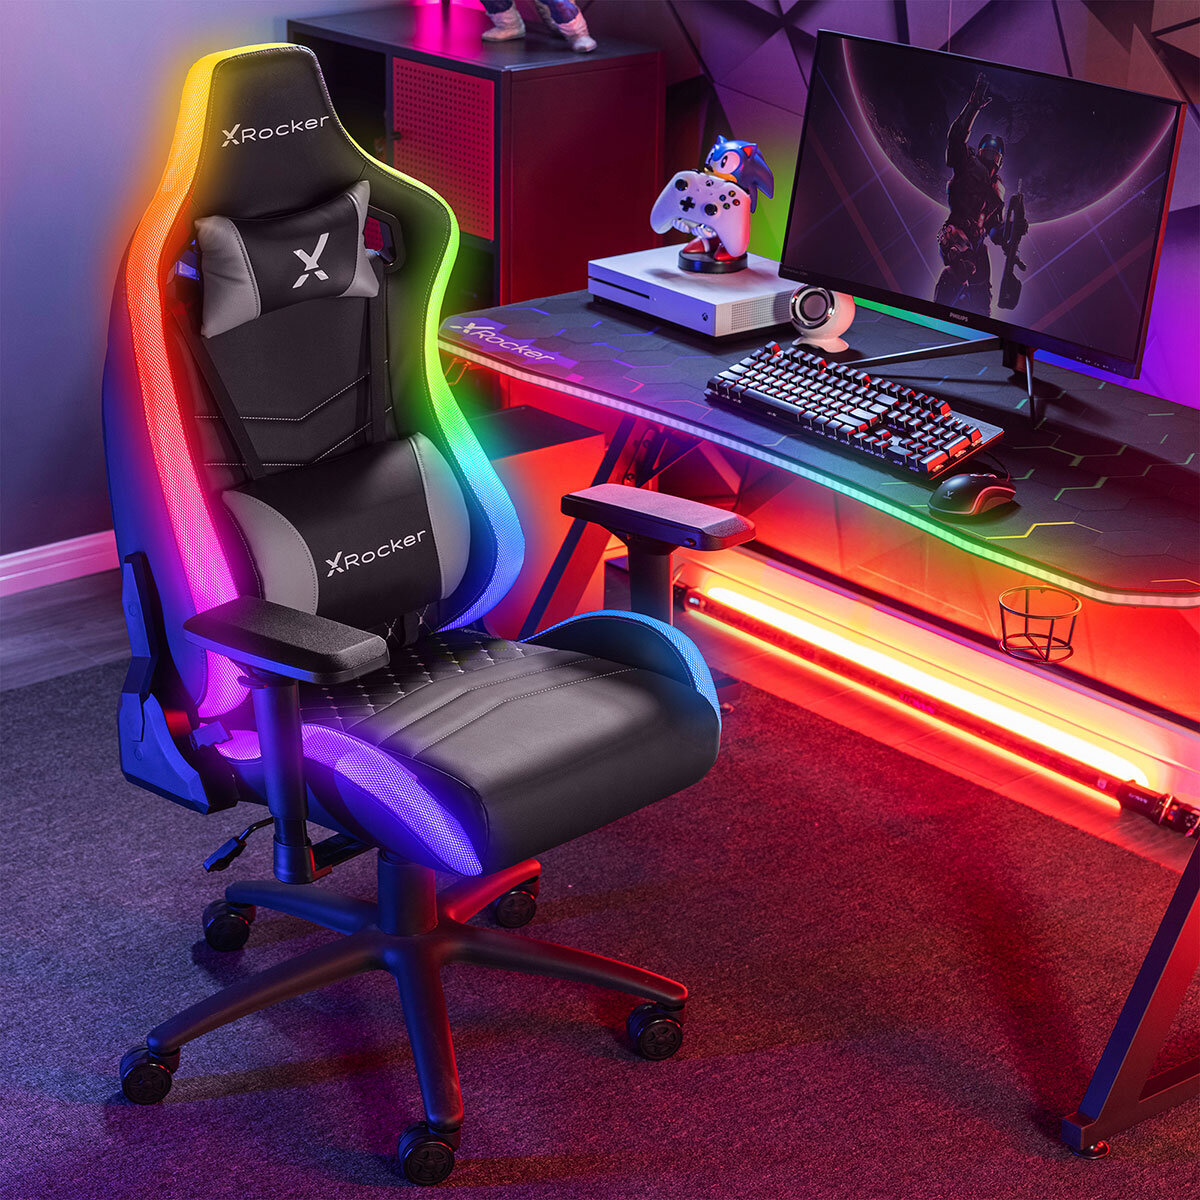 X Rocker Opal RGB Gaming Chair with LED Lights | Costco UK